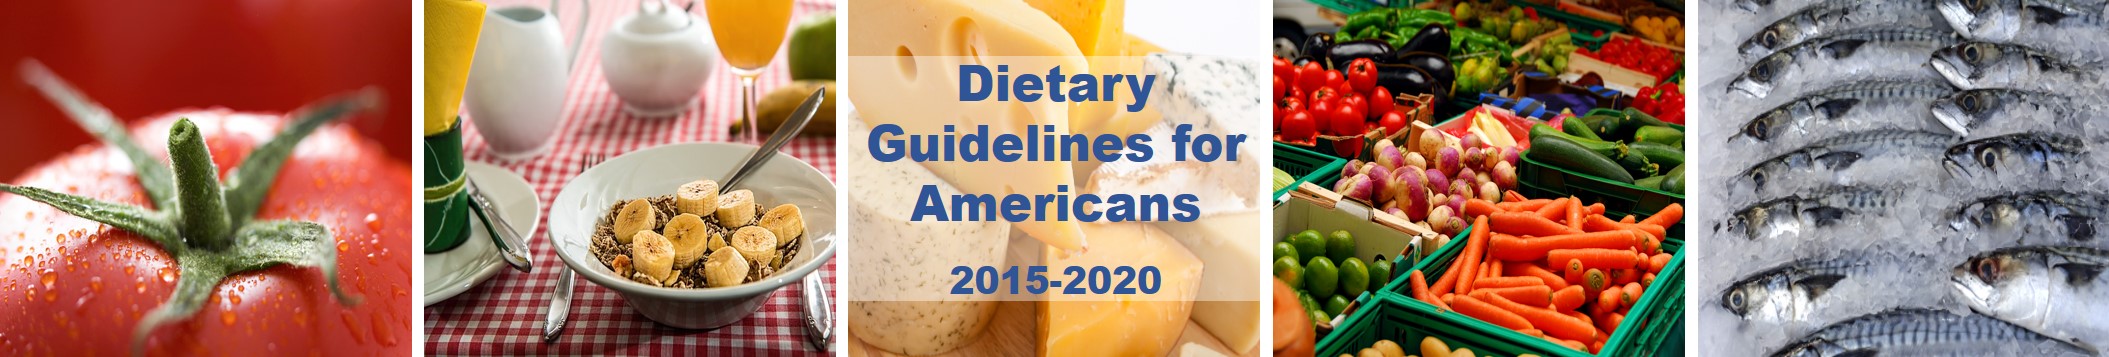 2015 2020 Dietary Guidelines For Americans